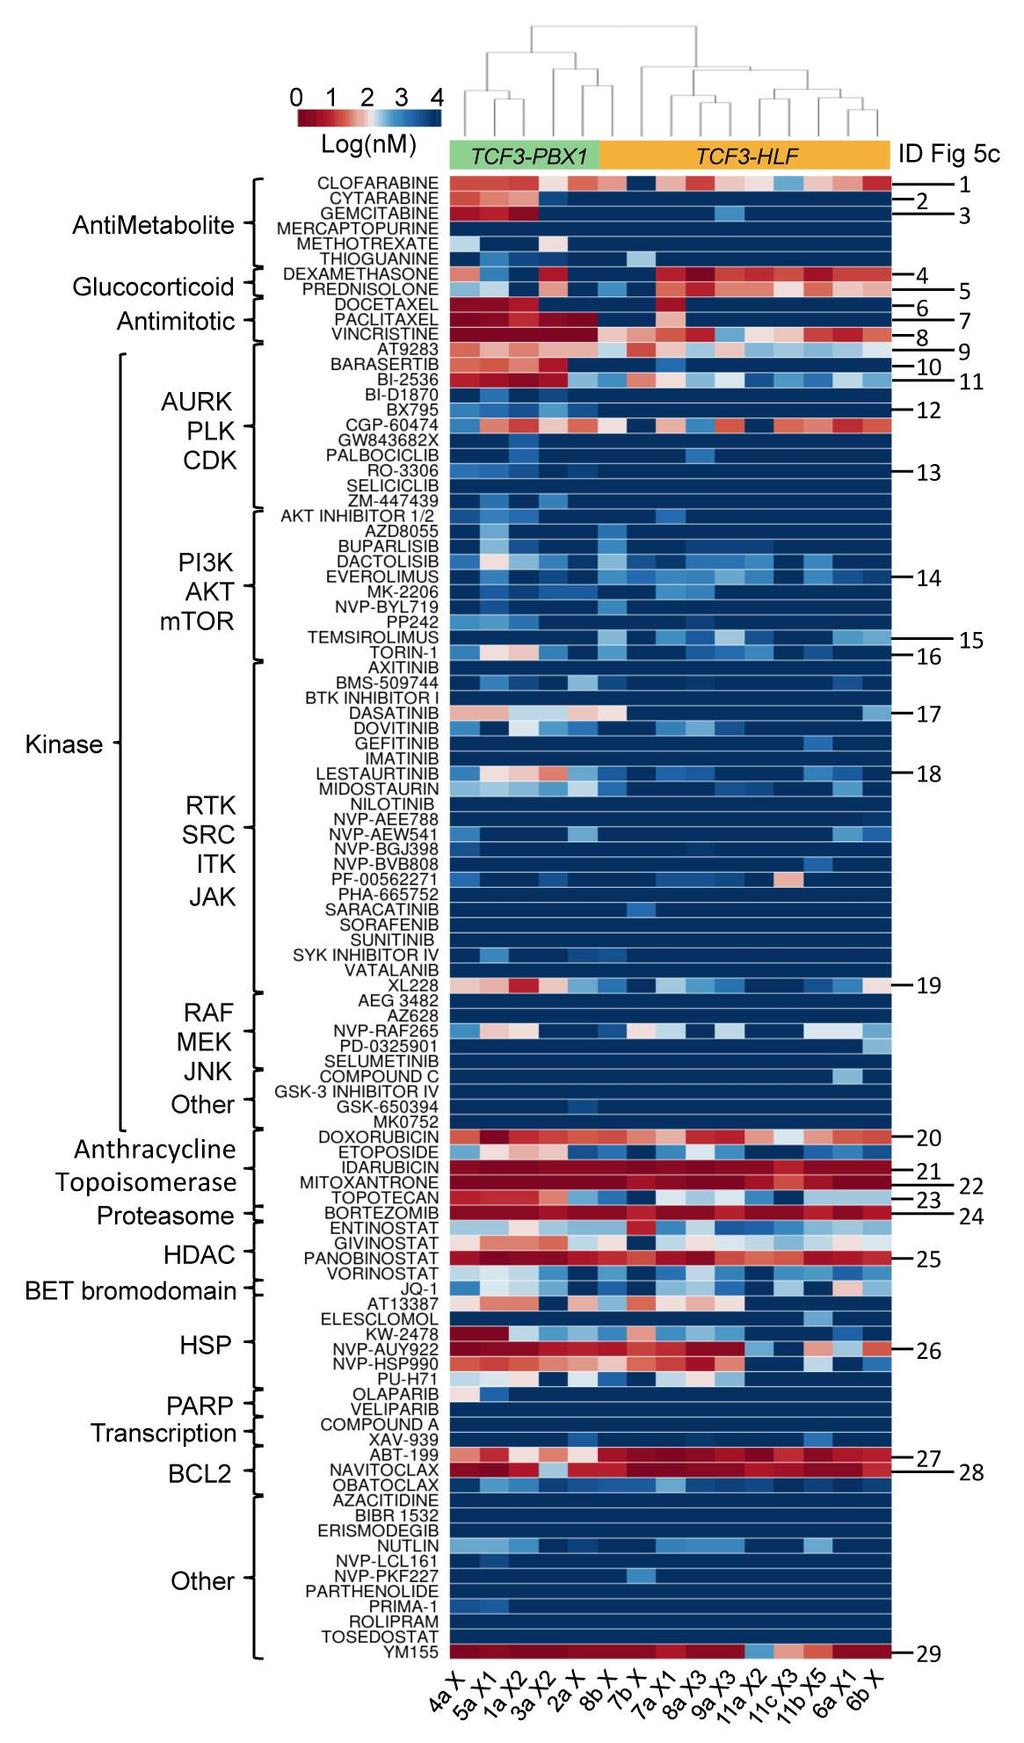 Supplementary Figure 10 Drug profiling of TCF3-PBX1 and TCF3-HLF ALL xenografts derived from diagnostic, MRD and relapse samples.